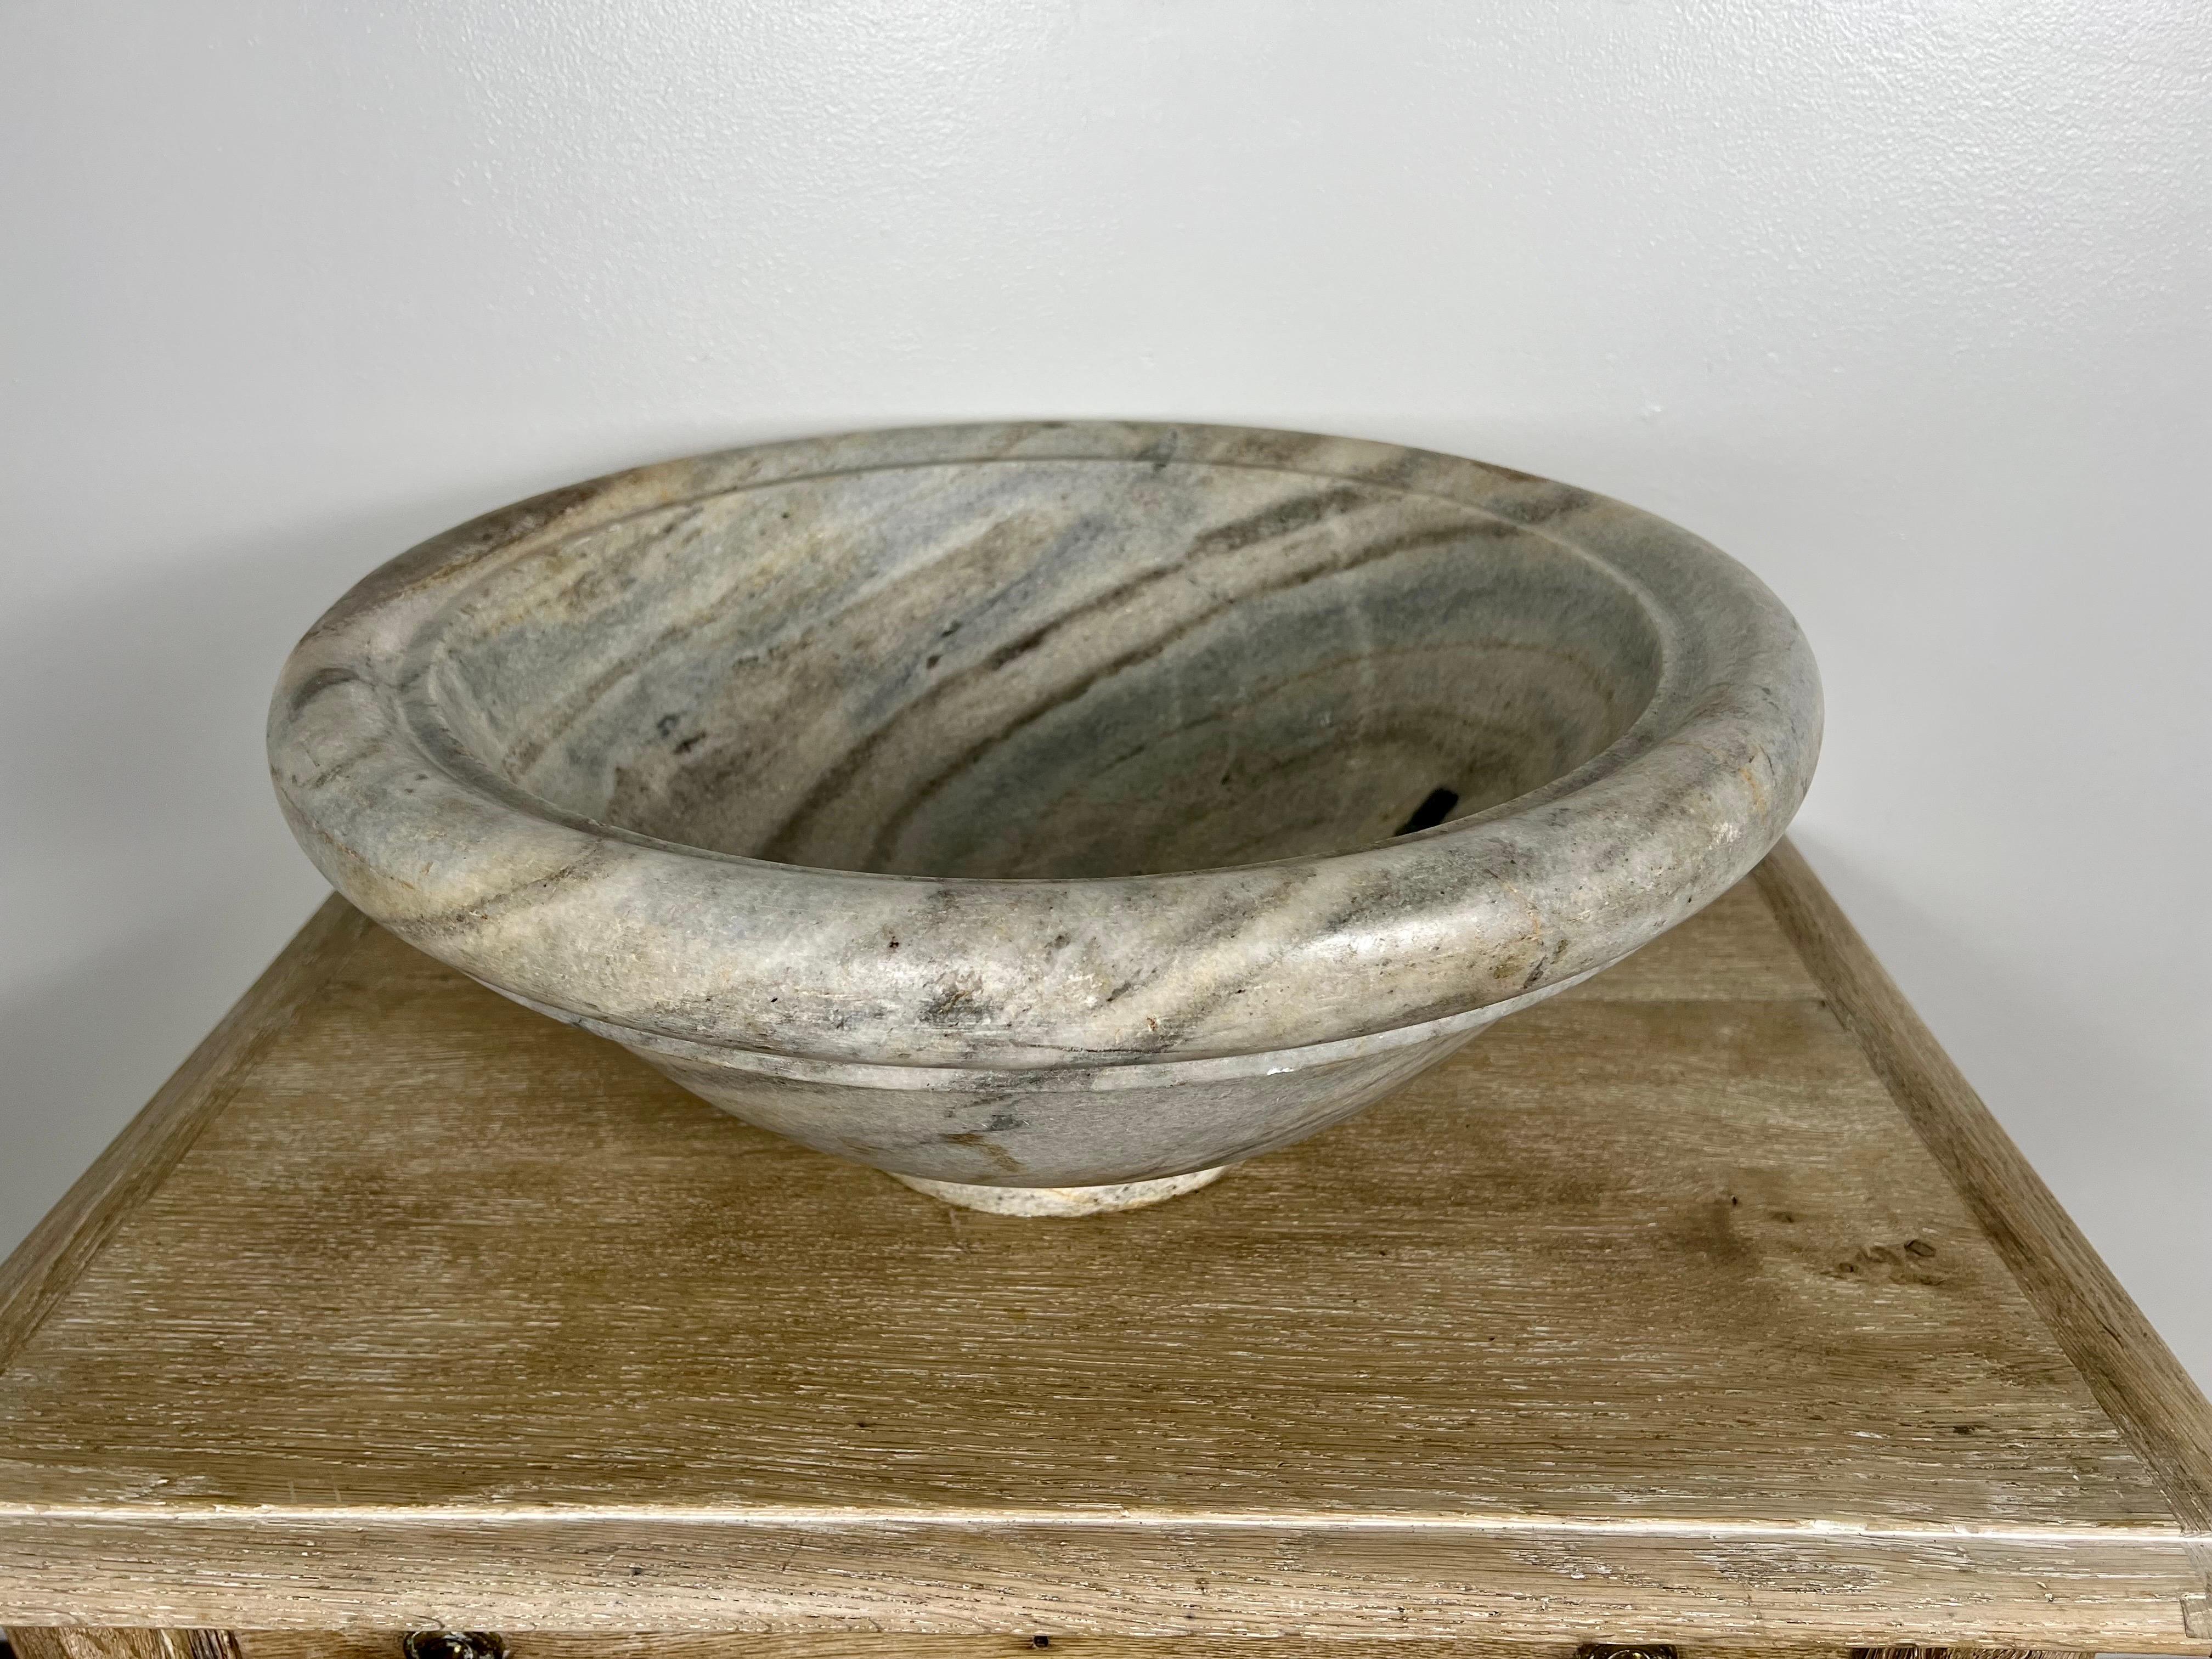 Beautiful early 20th century Italan marble sink bowl. The whole is drilled for drainage. This is vintage stock that was never used.